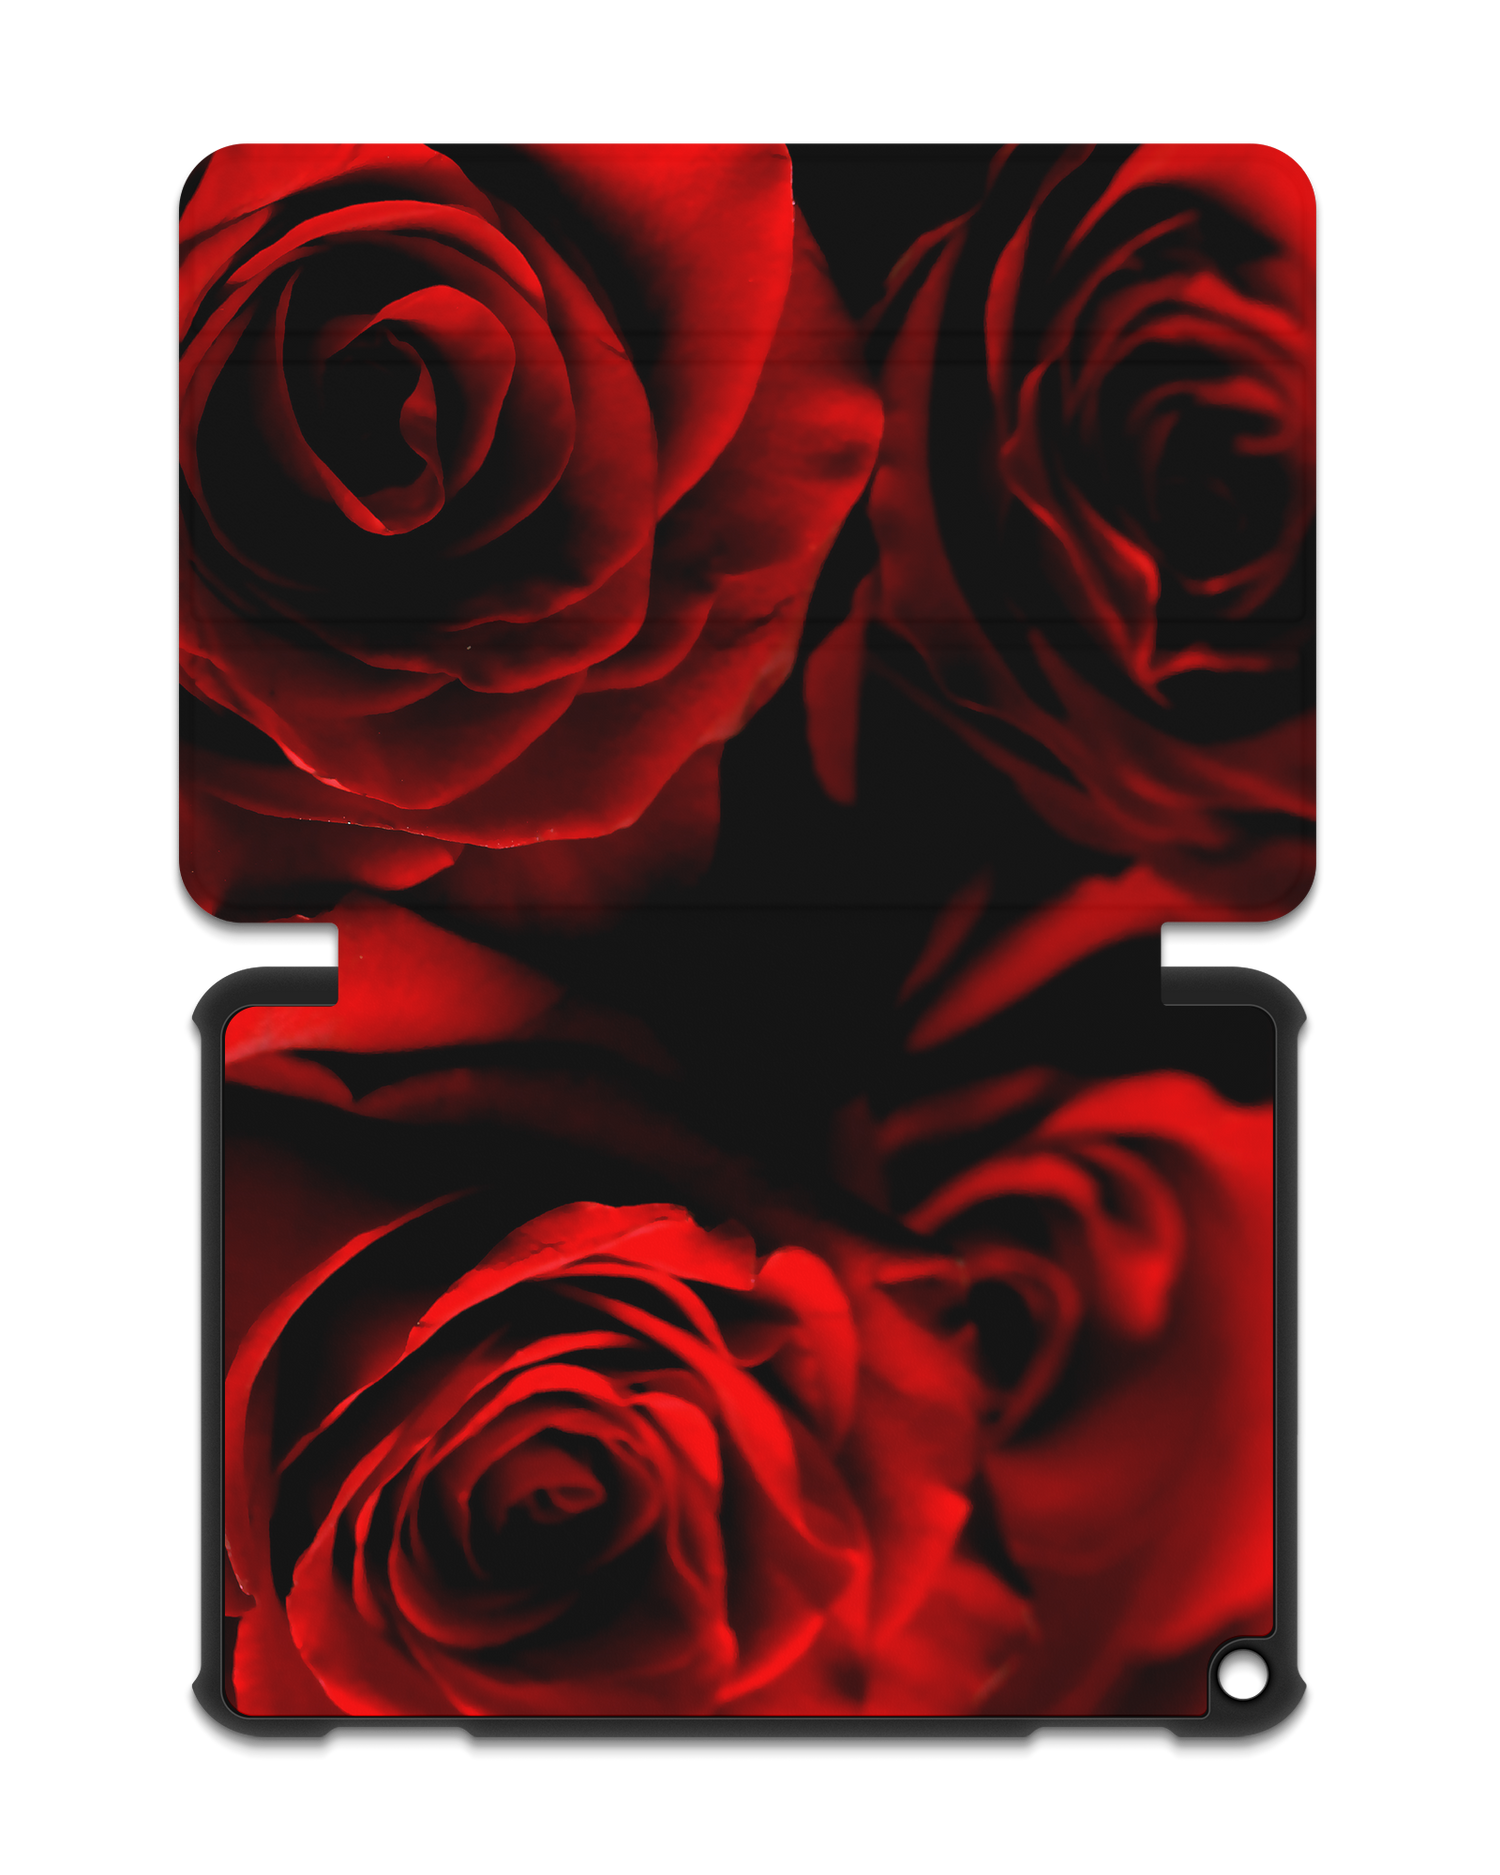 Red Roses Tablet Smart Case for Amazon Fire HD 8 (2022), Amazon Fire HD 8 Plus (2022), Amazon Fire HD 8 (2020), Amazon Fire HD 8 Plus (2020): Opened